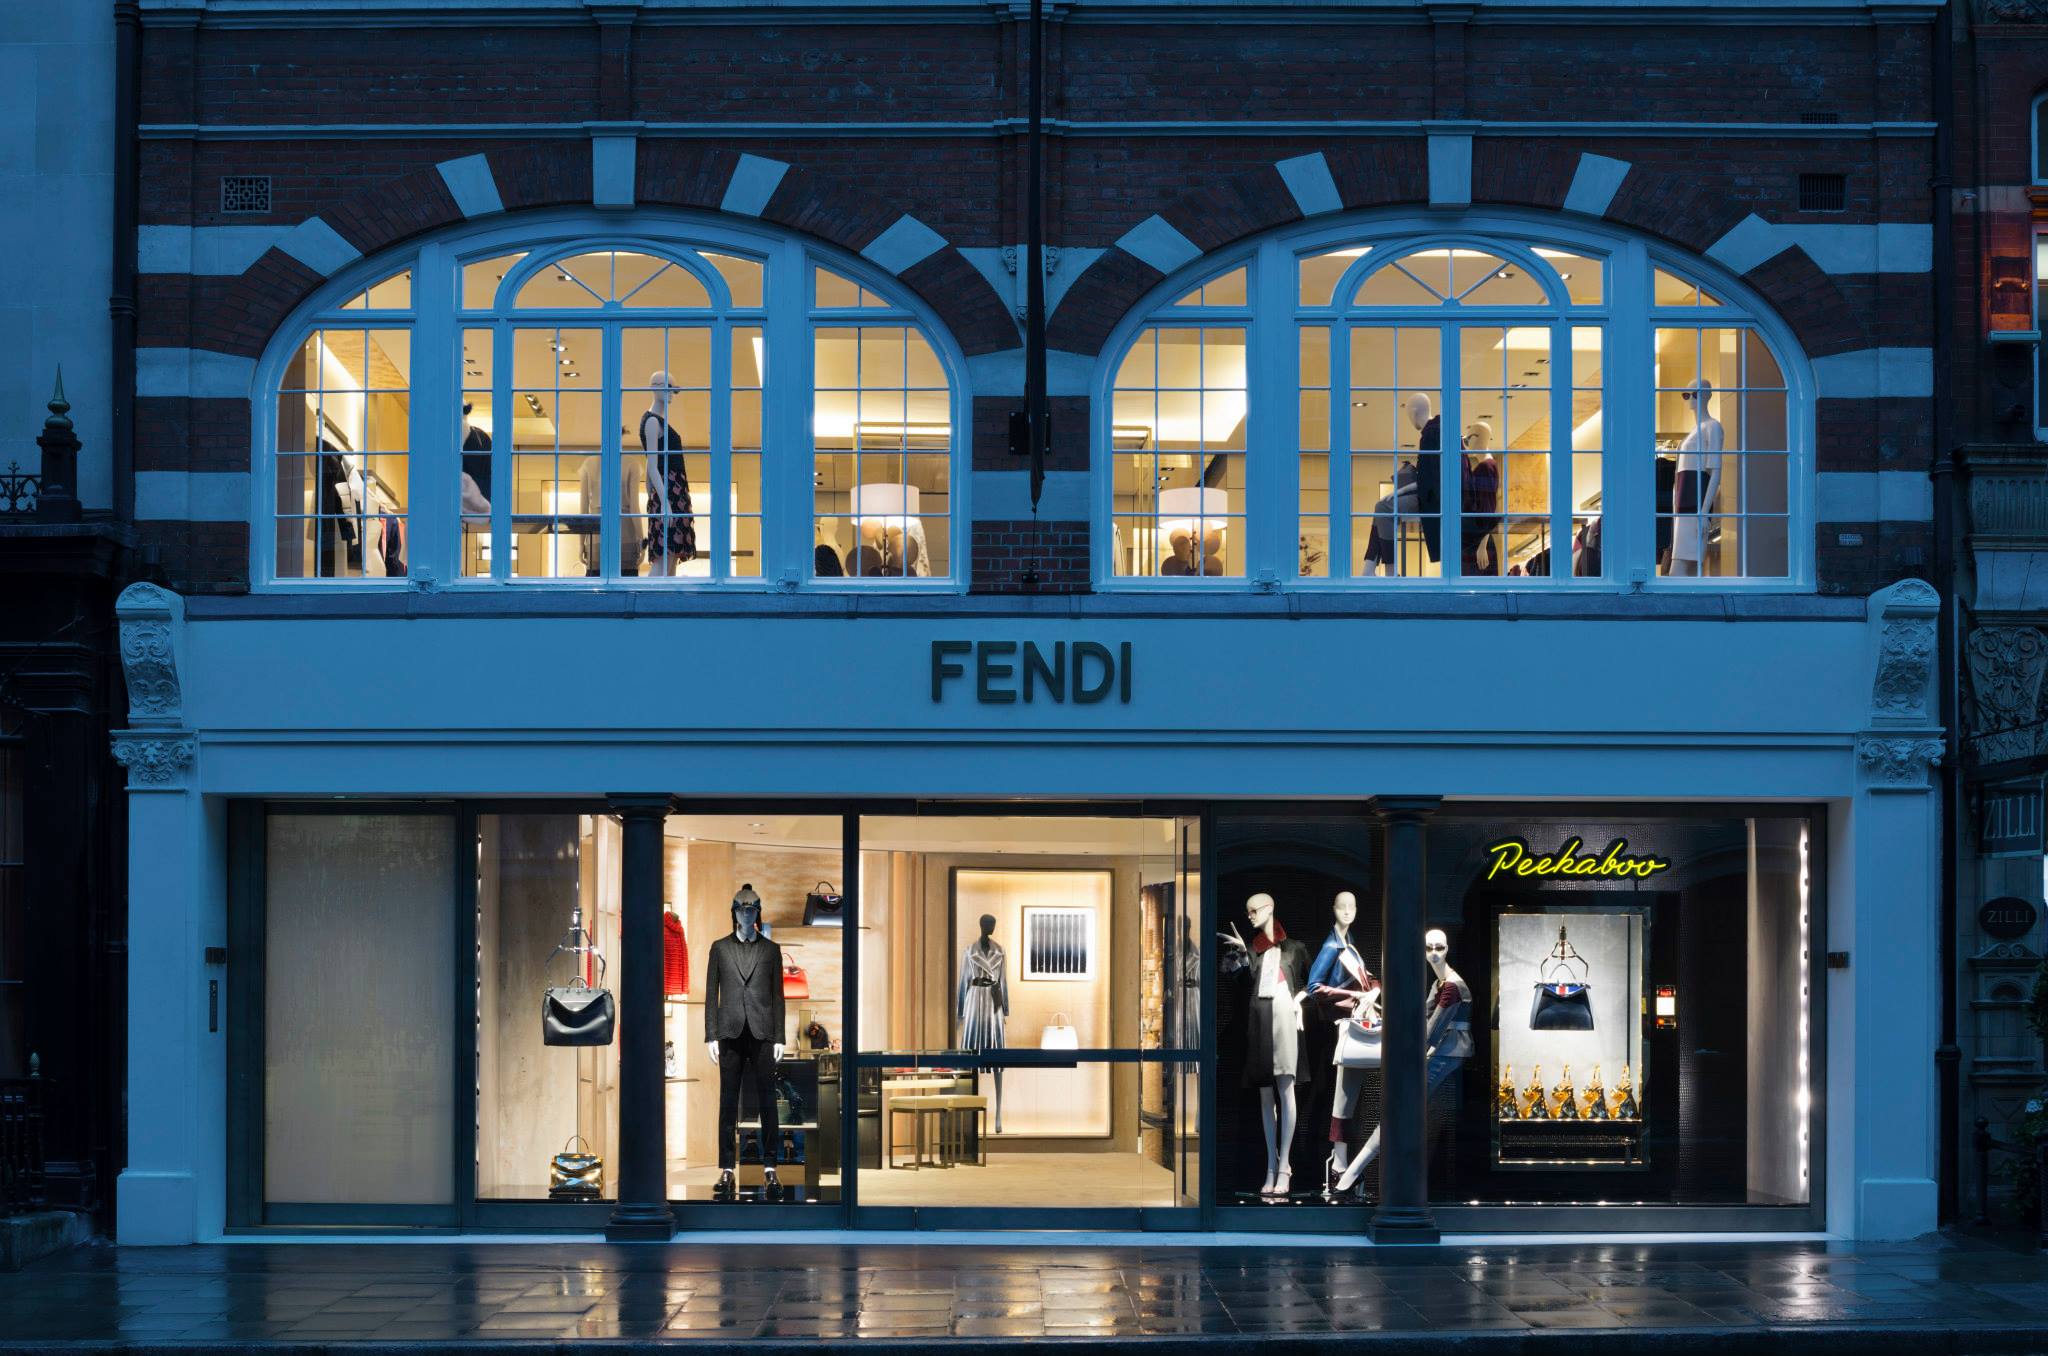 The new Fendi boutique opening in London 2014 - 2LUXURY2.COM